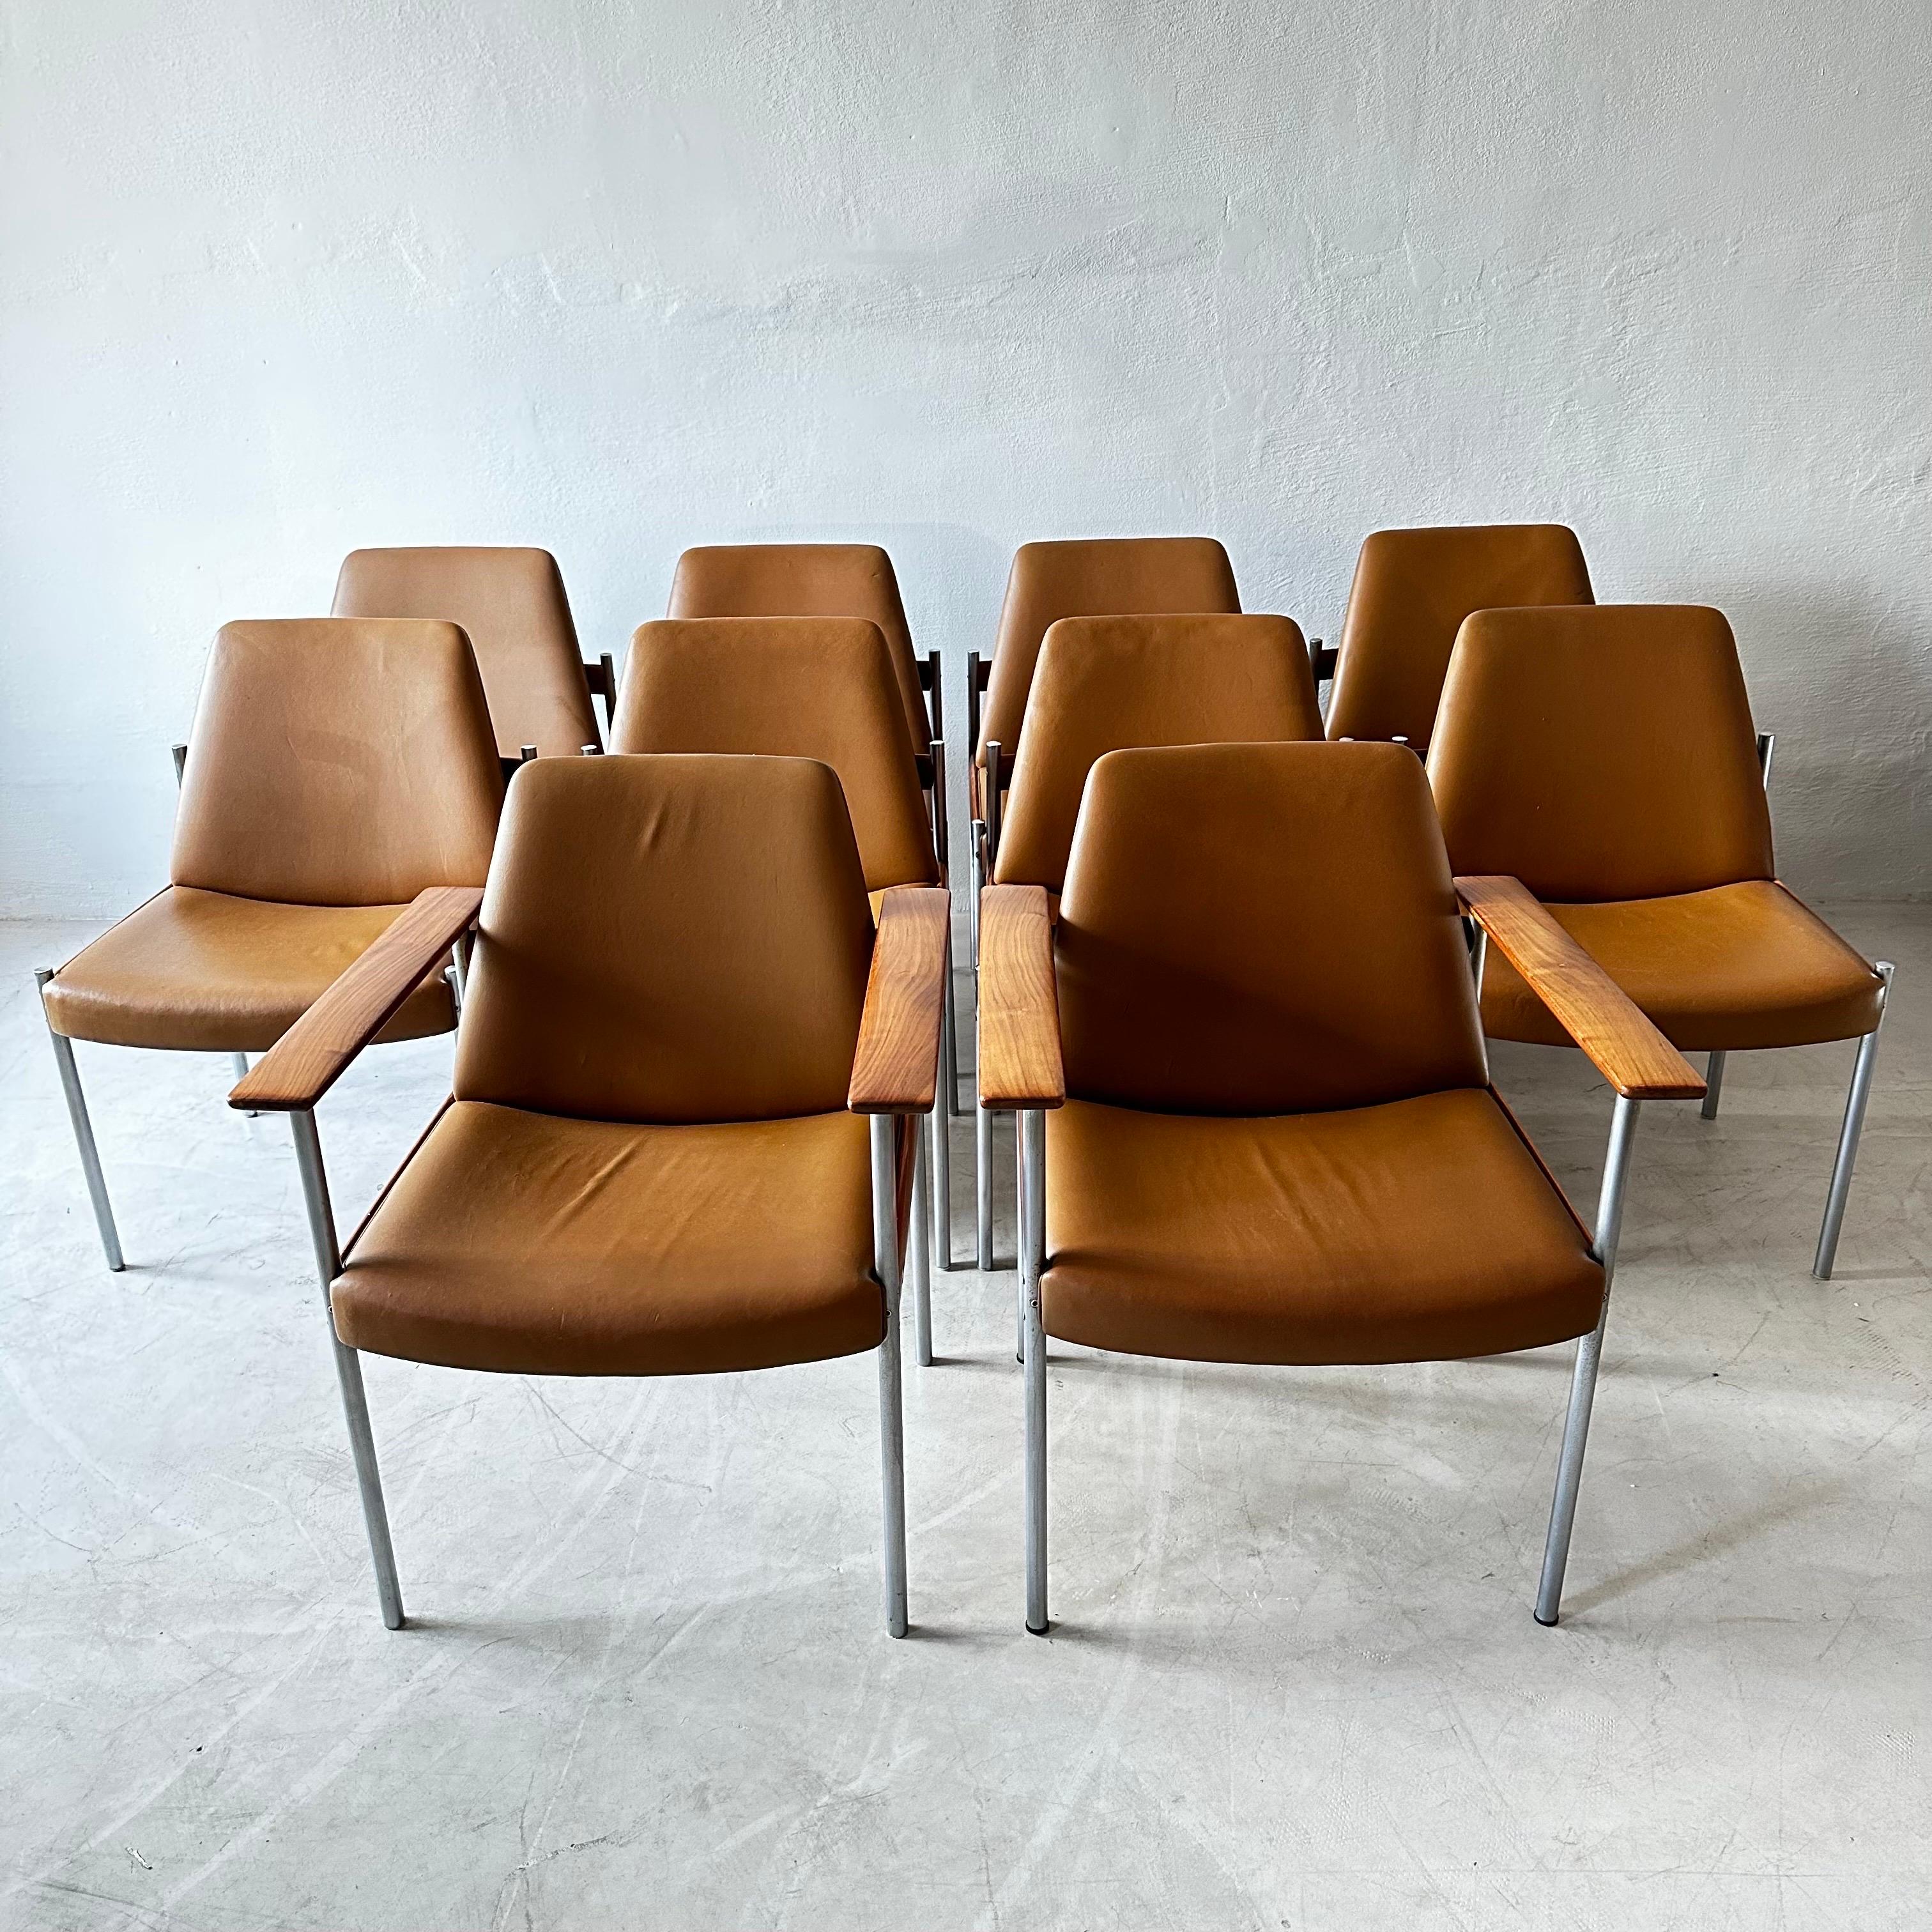 Scandinavian Modern Sven Ivar Dysthe Large Set of 10 Chairs in Cognac Leather and Walnut For Sale